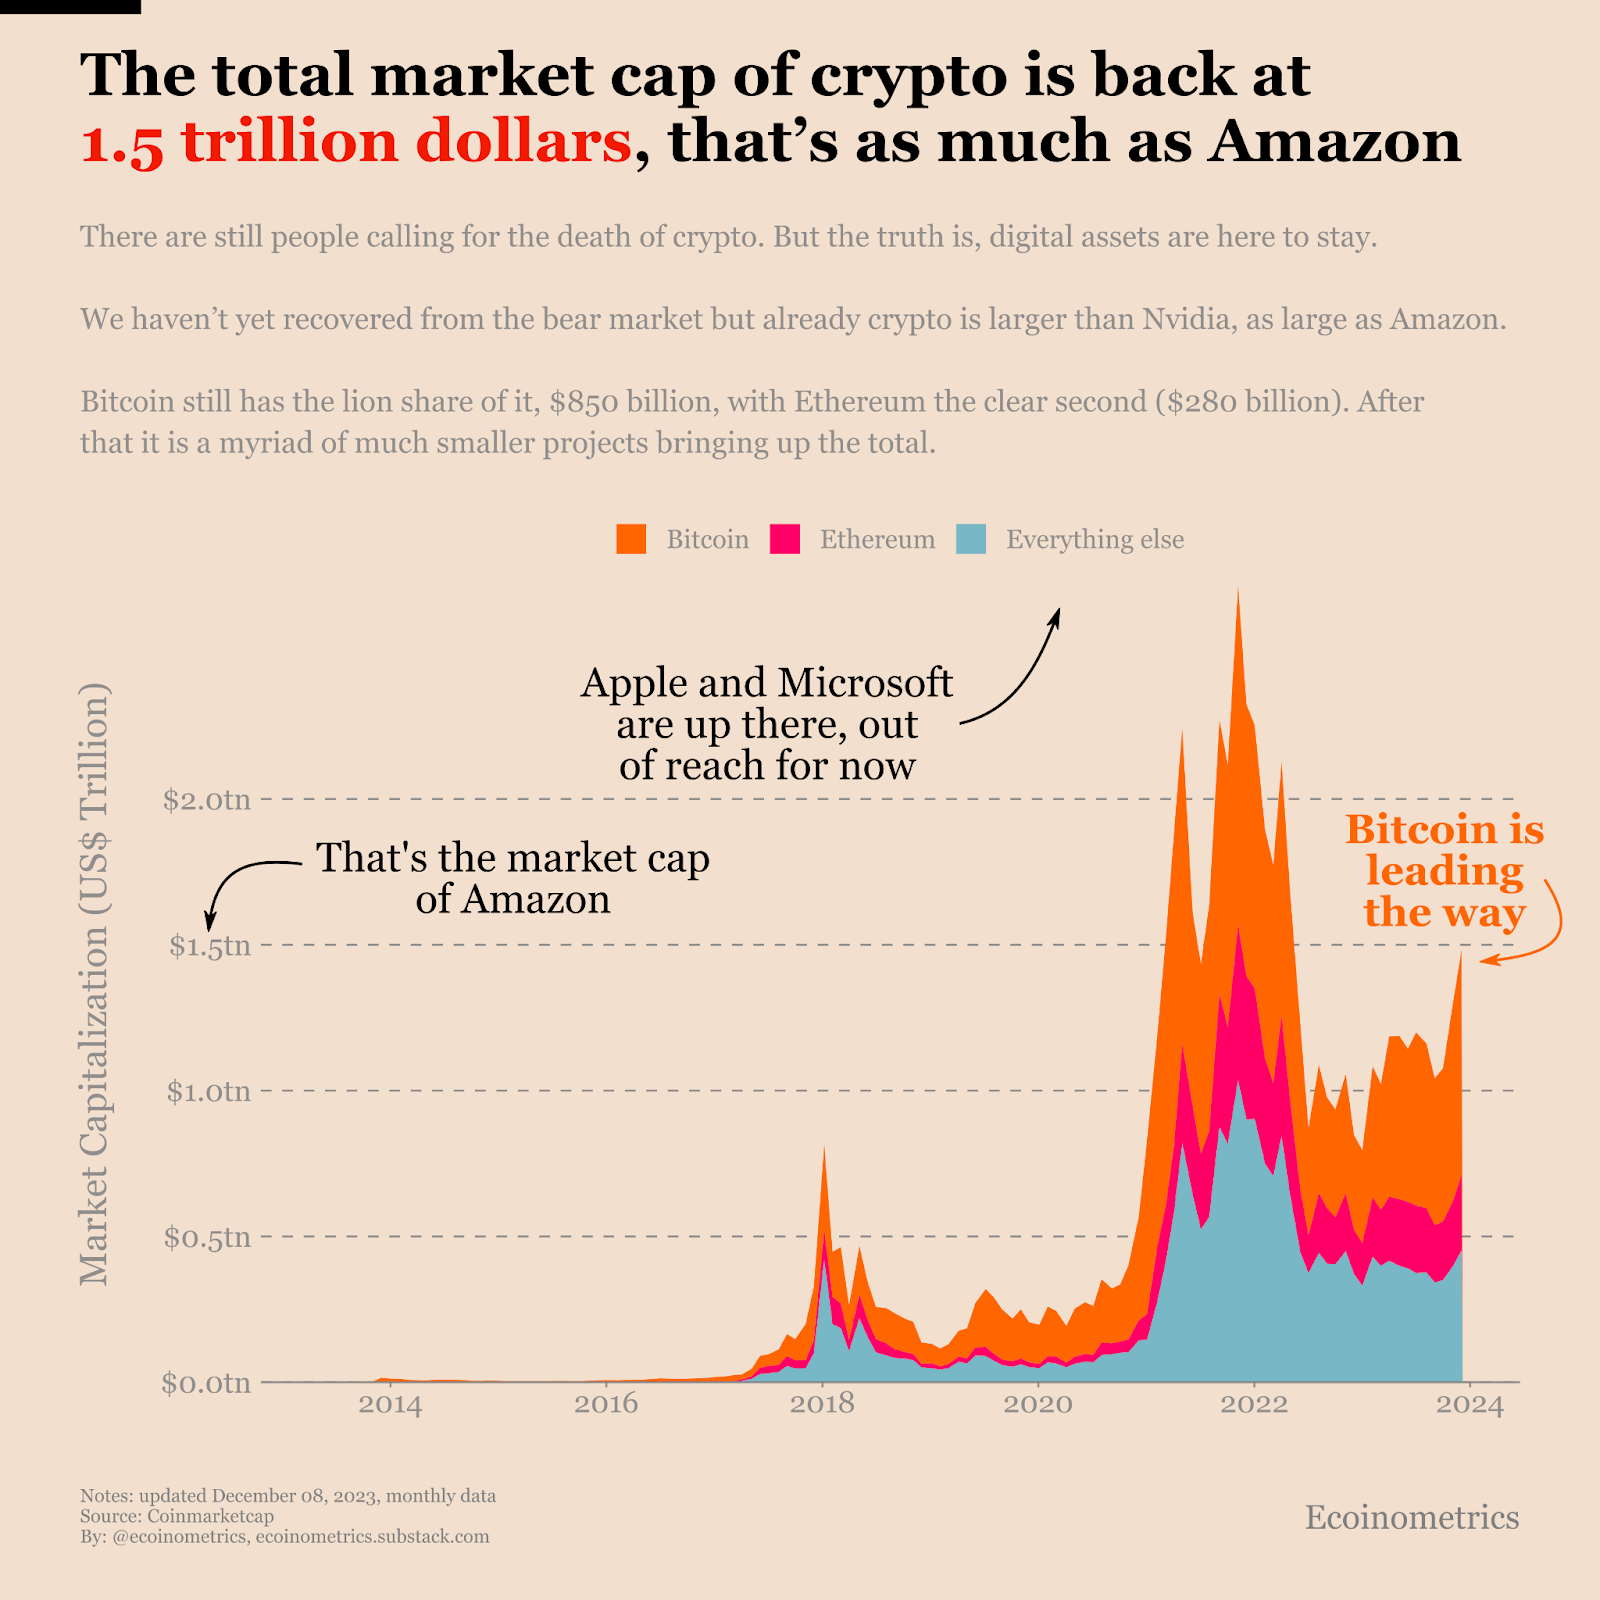 The total market cap of Bitcoin, Ethereum, and the entire crypto market